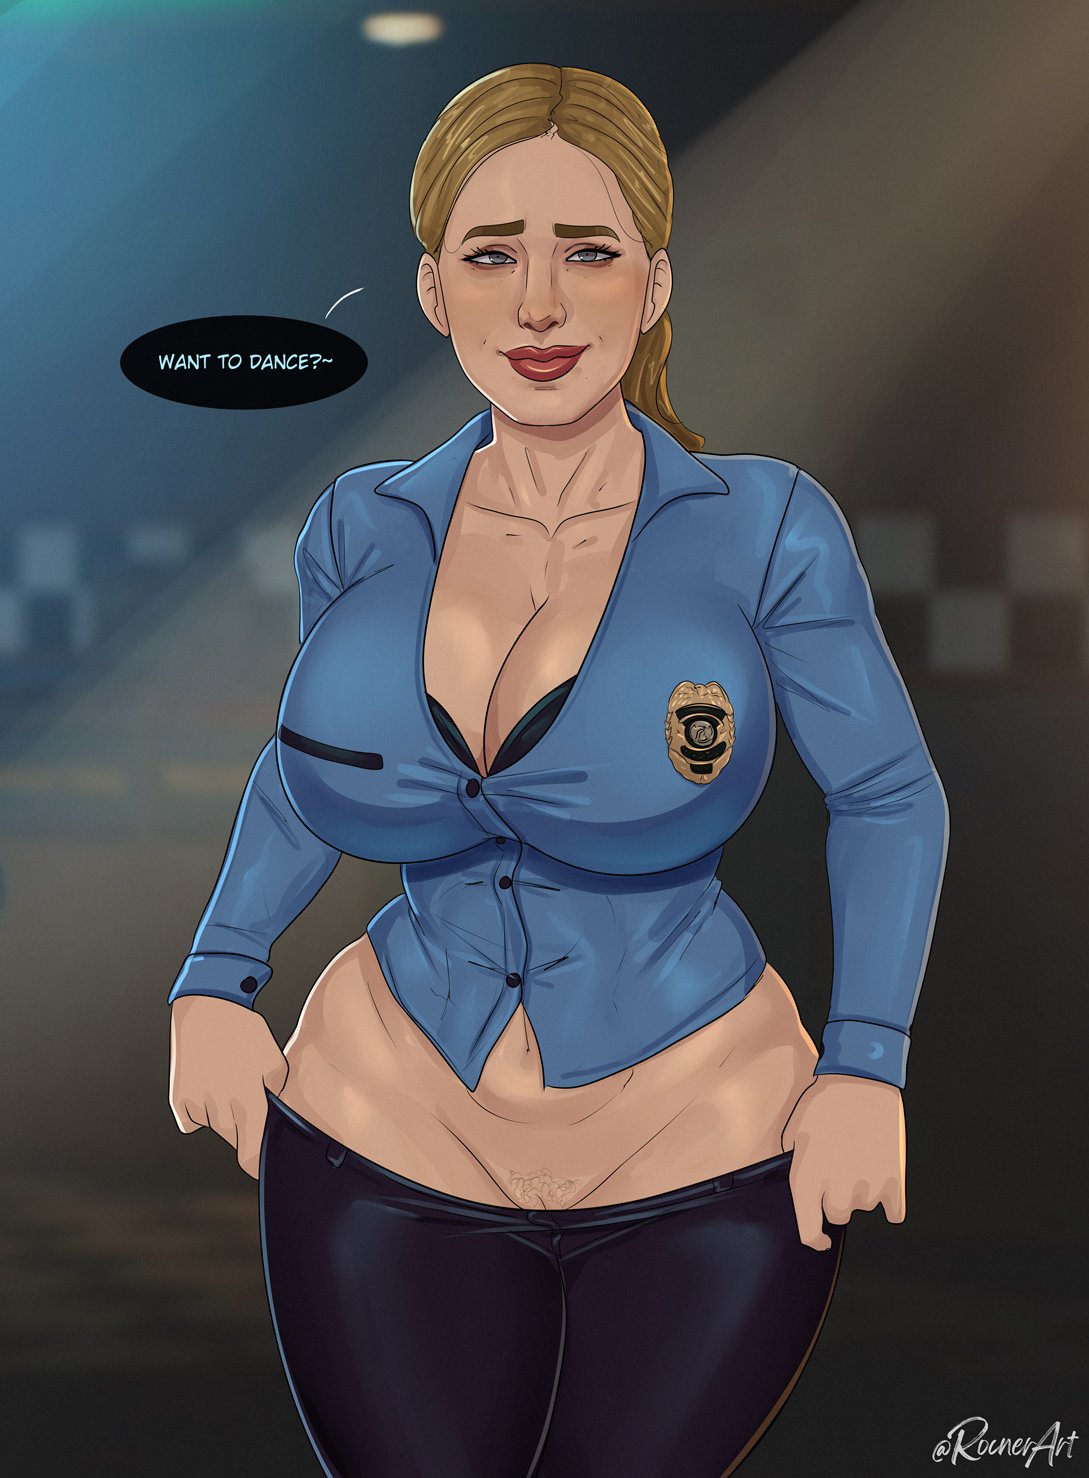 1girls about_to_burst about_to_pop big_ass big_breasts big_butt blumhouse_productions bra busty button_down_shirt buttoned_shirt buttons cleavage five_nights_at_freddy's five_nights_at_freddy's_(film) milf_body mommy no_panties police police_uniform pulling_down_pants rocner universal_studios vanessa_(fnaf) vanessa_shelly wide_hips wide_thighs